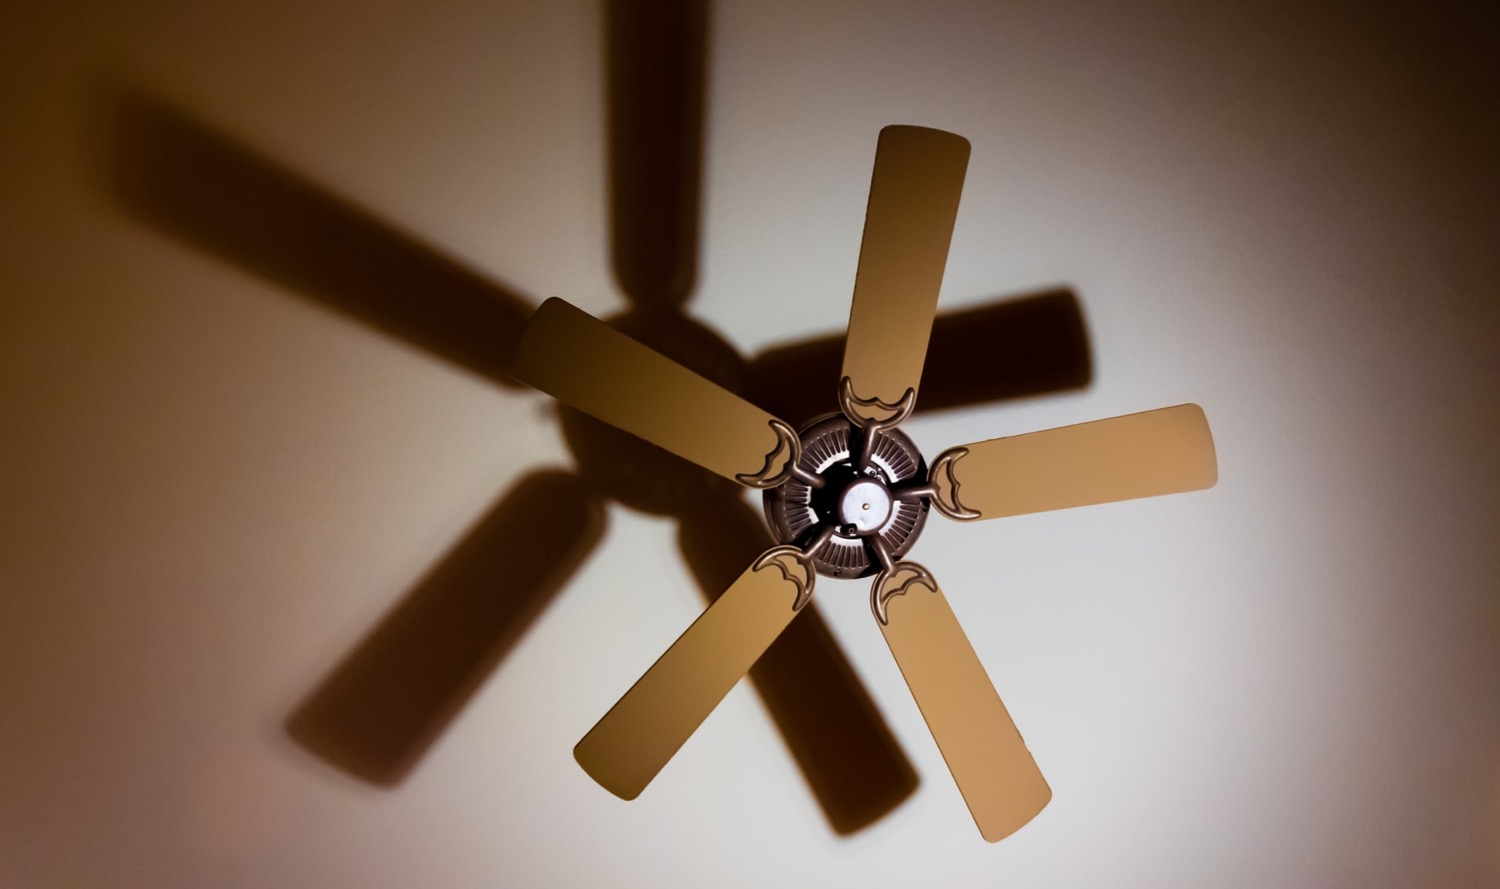 5 Best Ceiling Fans With Light and Remote